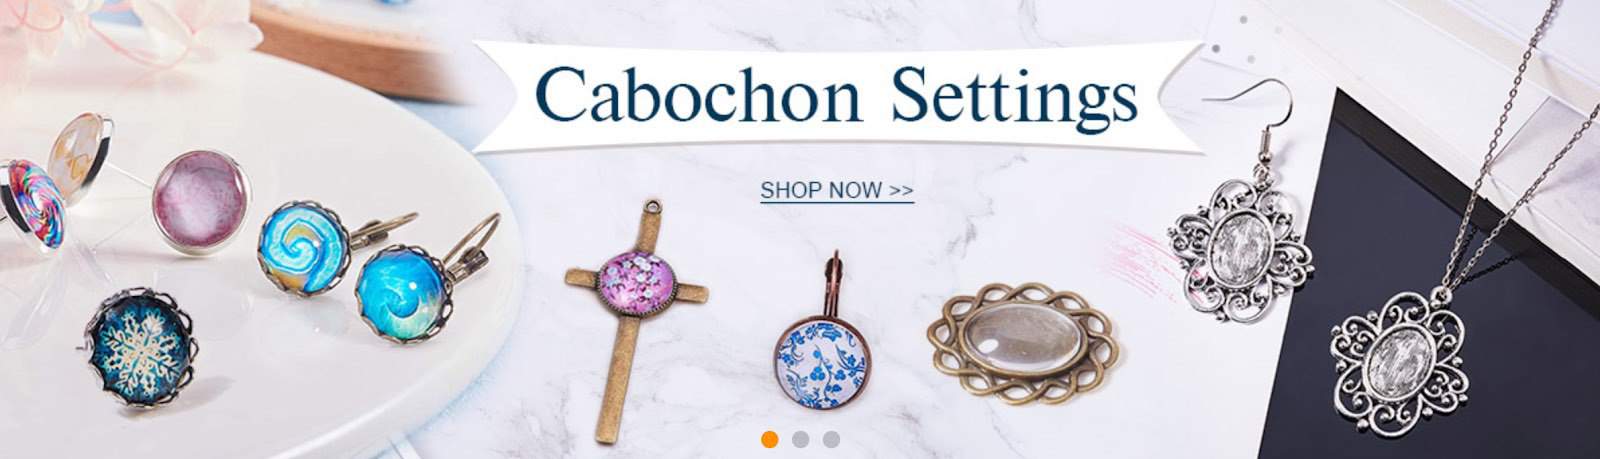 Beebeecraft | Cabochon settings | Accessories for DIY jewelry creations